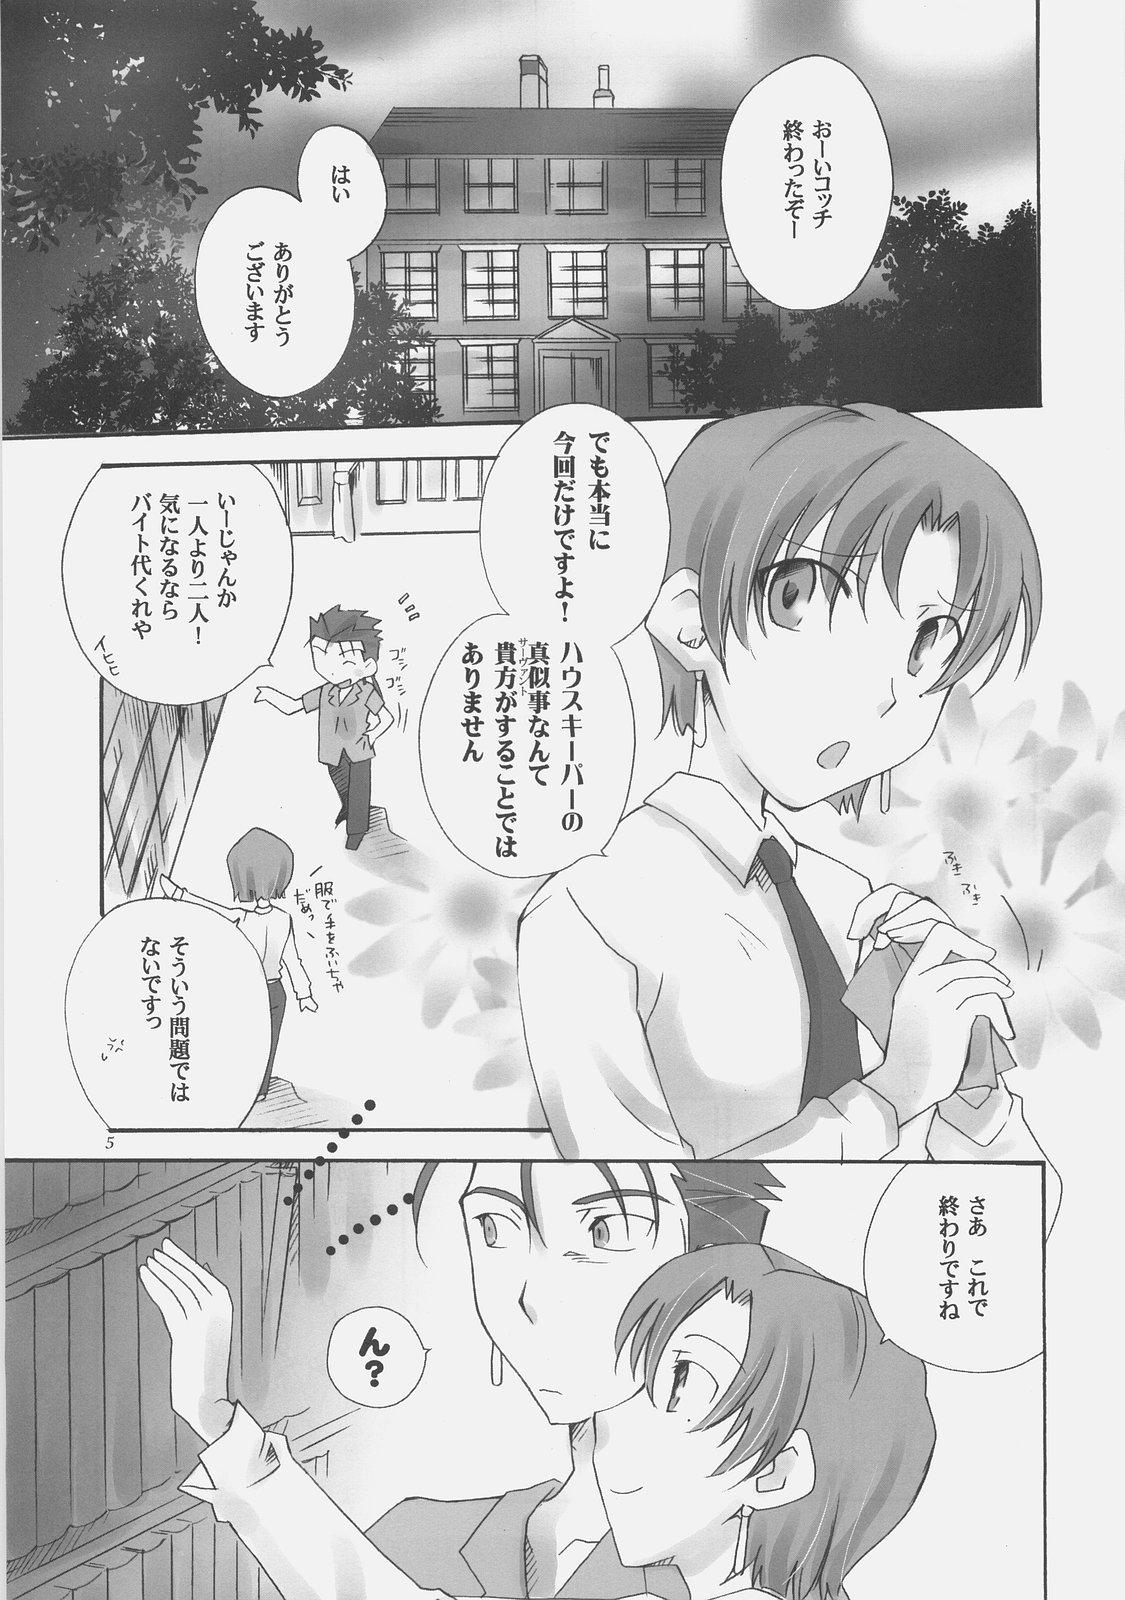 Pussylick Secret Mission - Fate hollow ataraxia Homemade - Page 3